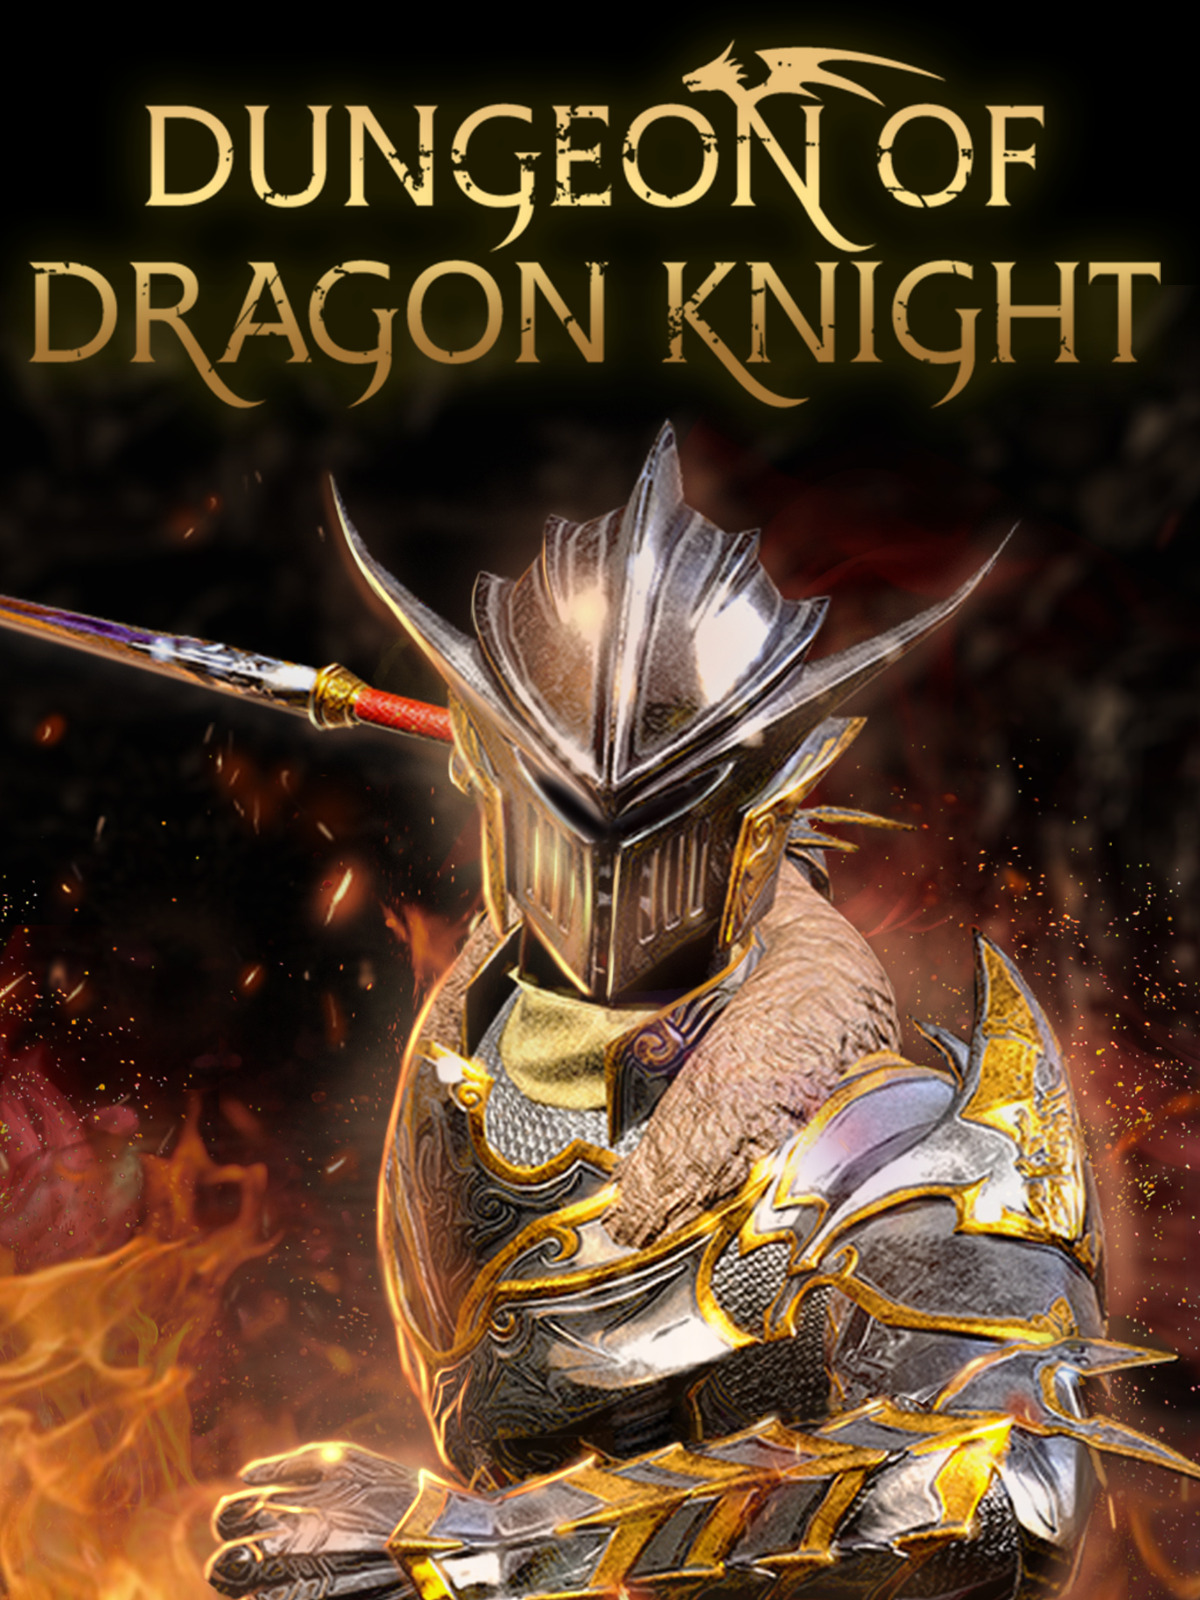 Dungeon Of Dragon Knight - Metacritic